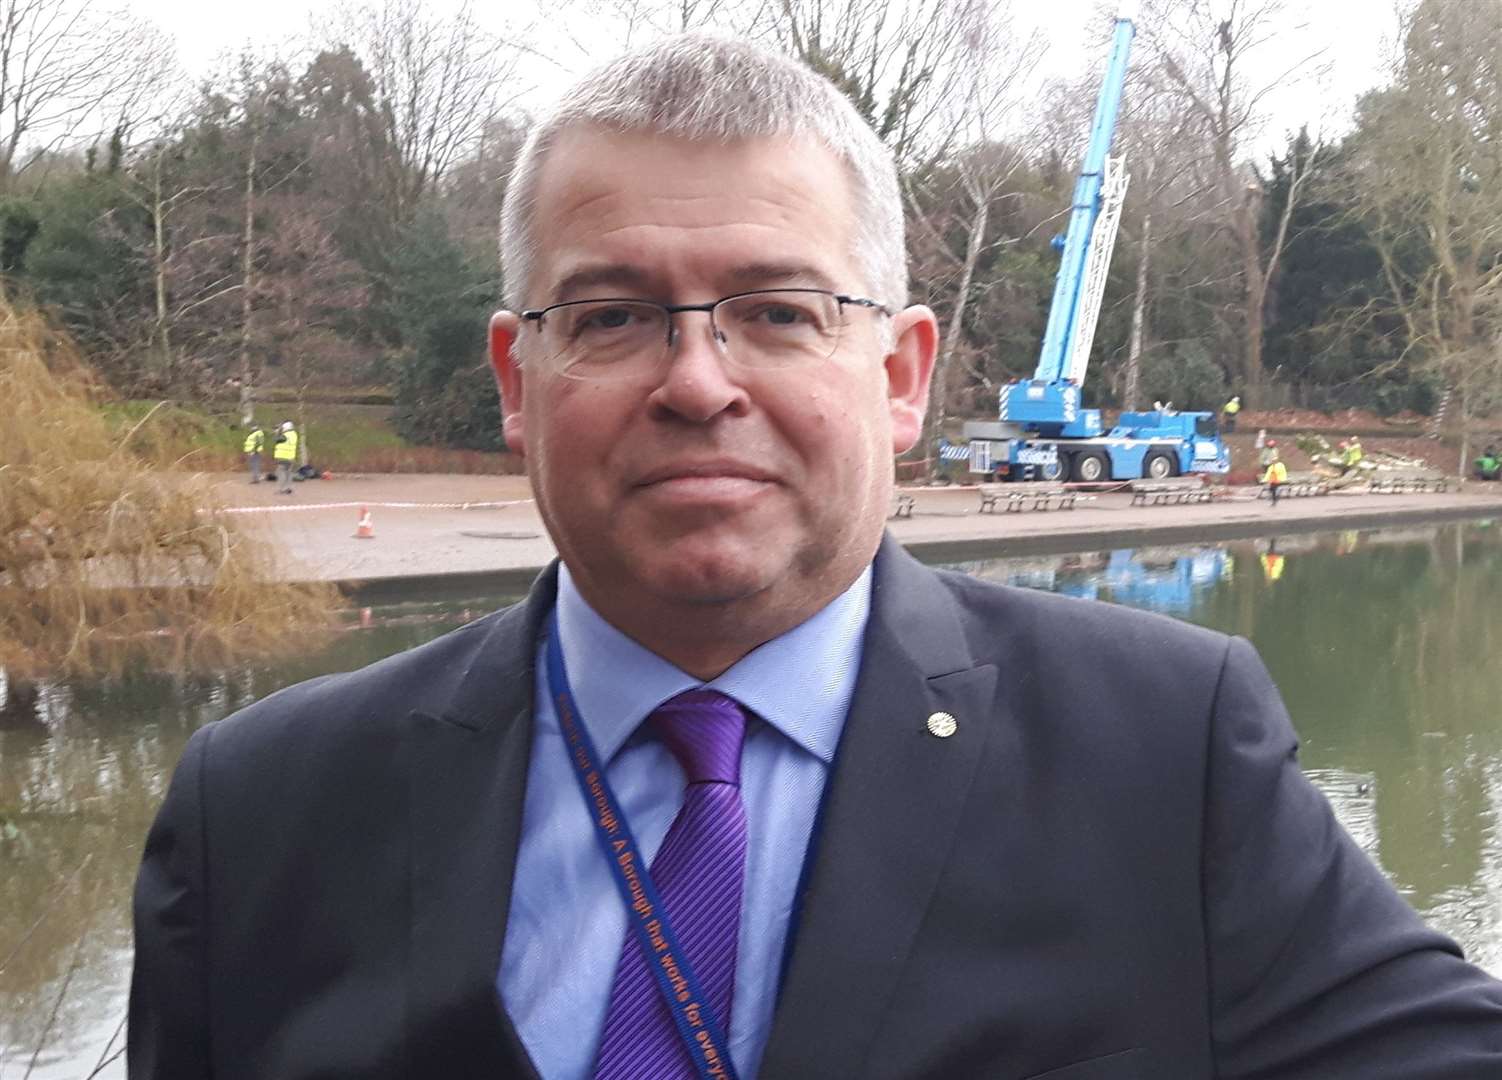 Maidstone Council leader Martin Cox says the Government's lack of response is 'unacceptable'